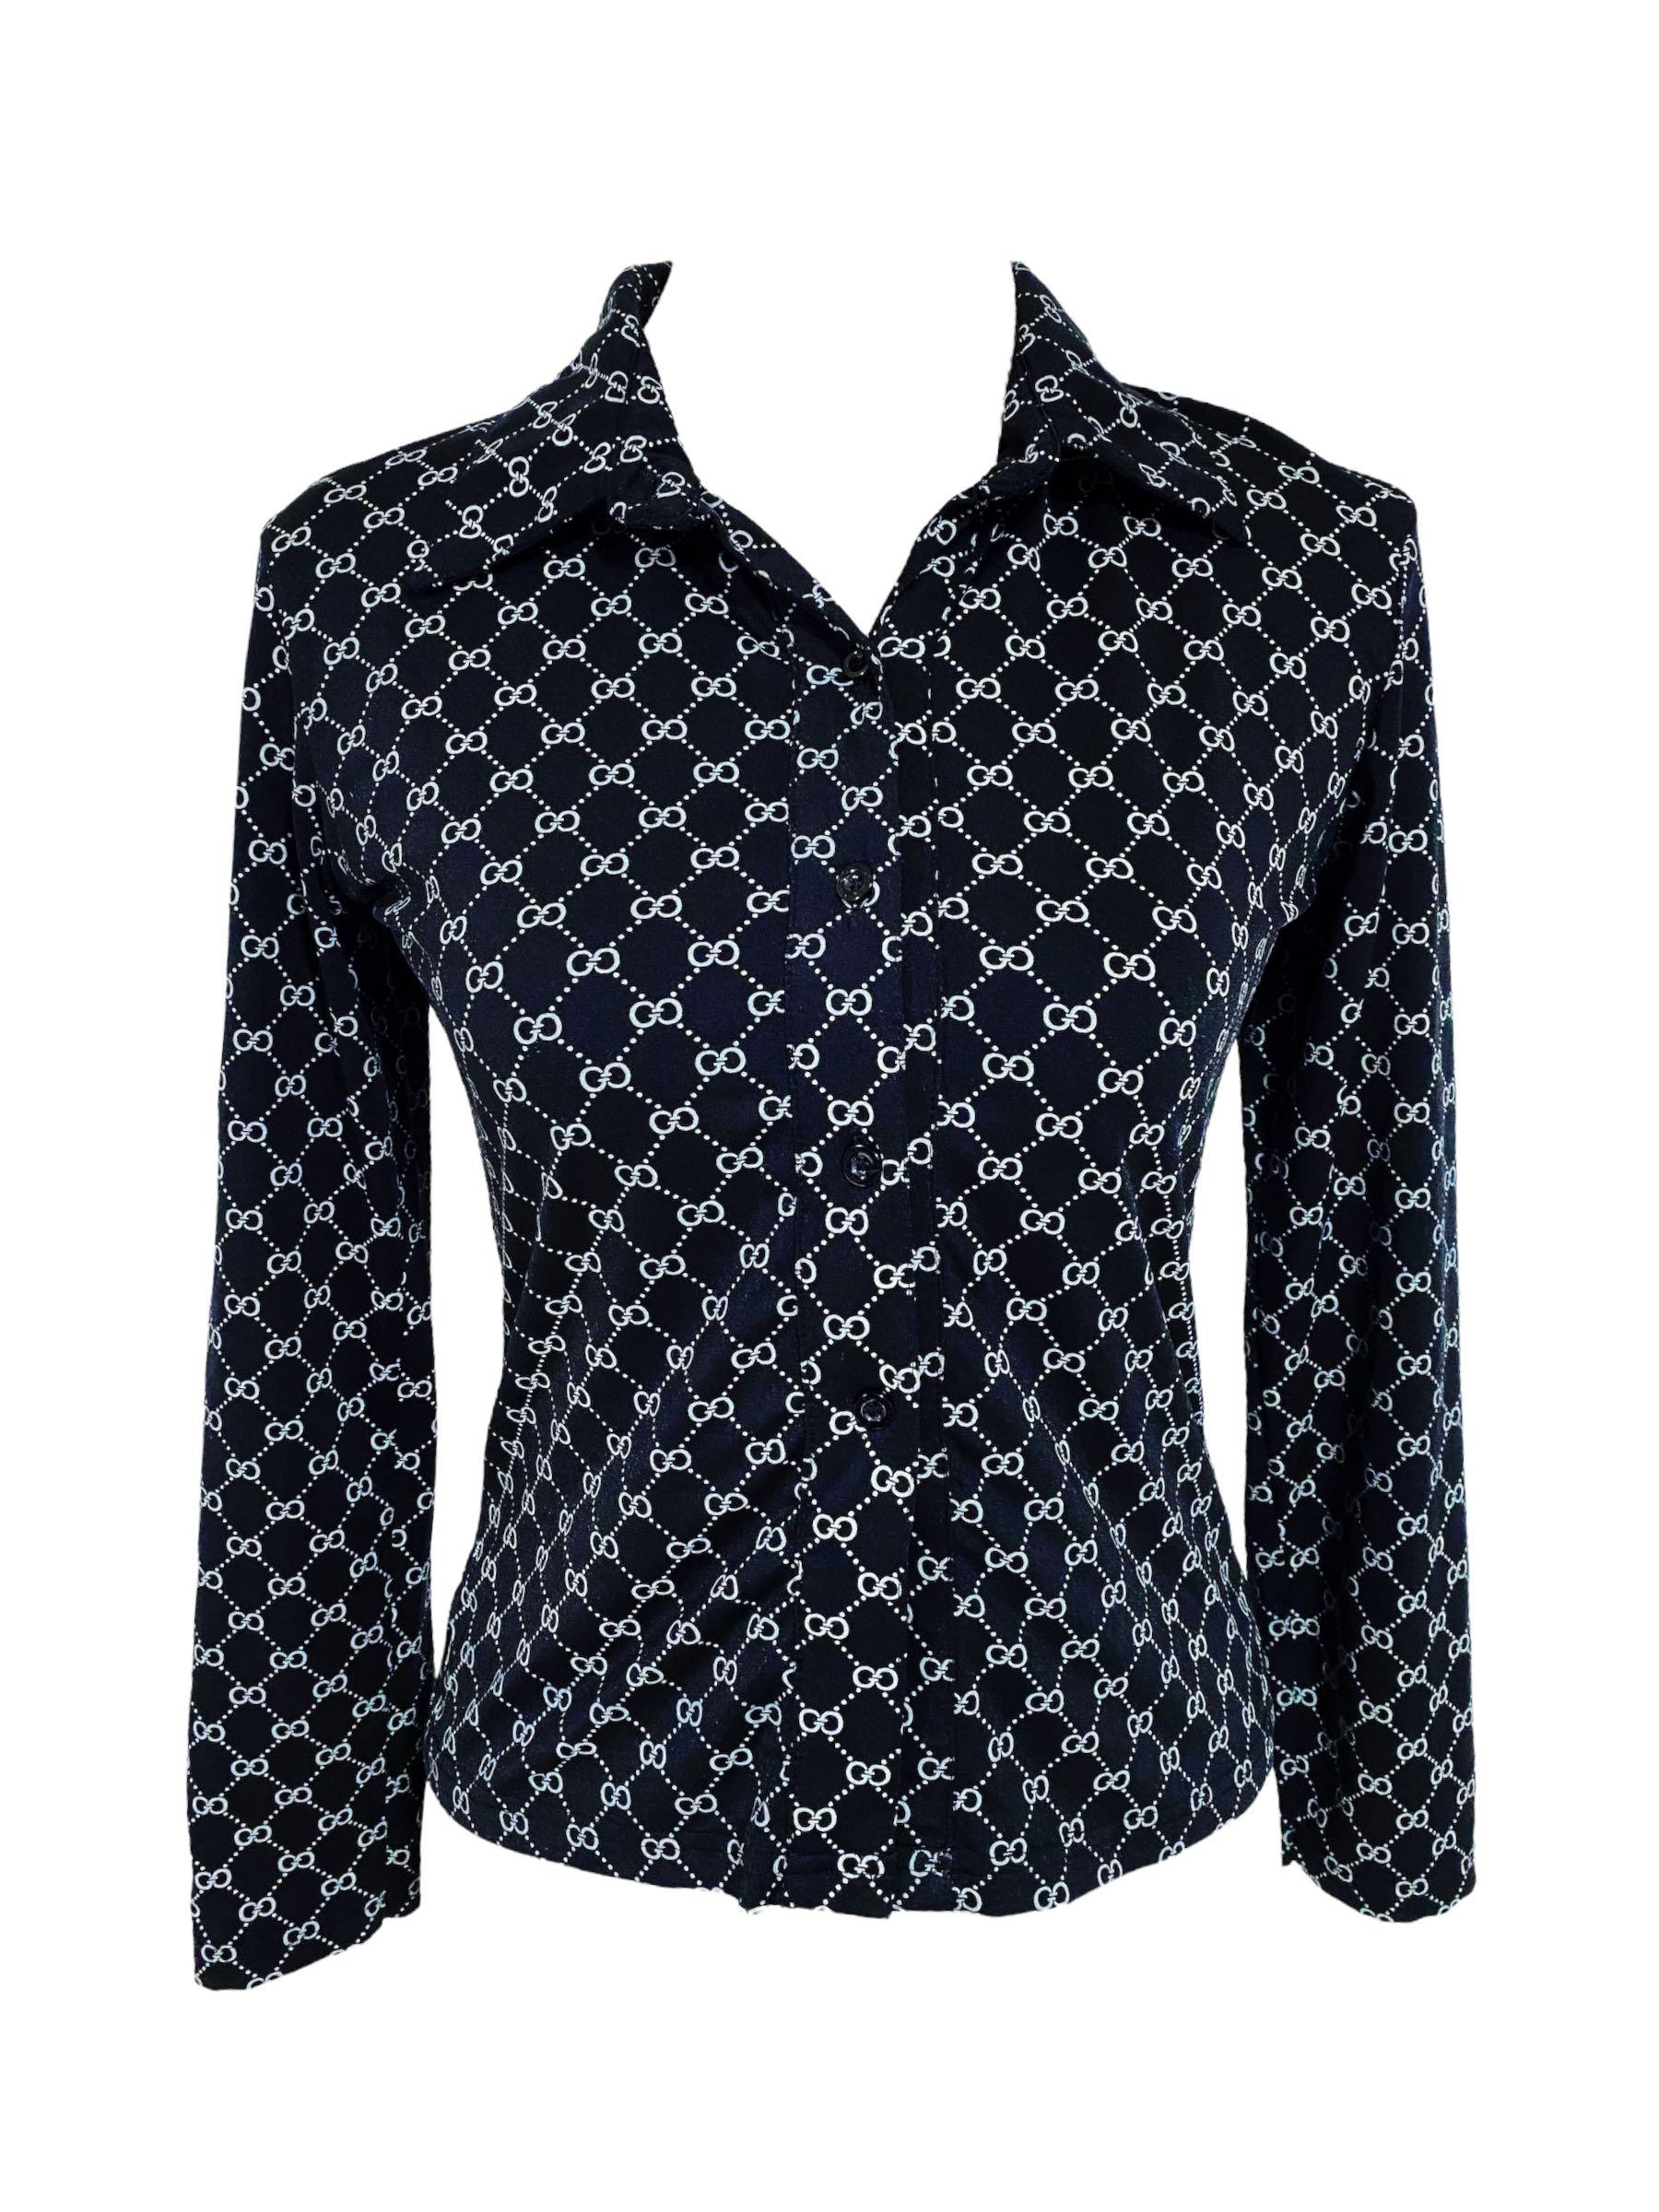 Tom Ford for Gucci S/S 1998 Vintage GG Pattern Logo Monogram Button-Up Shirt  Top at 1stDibs